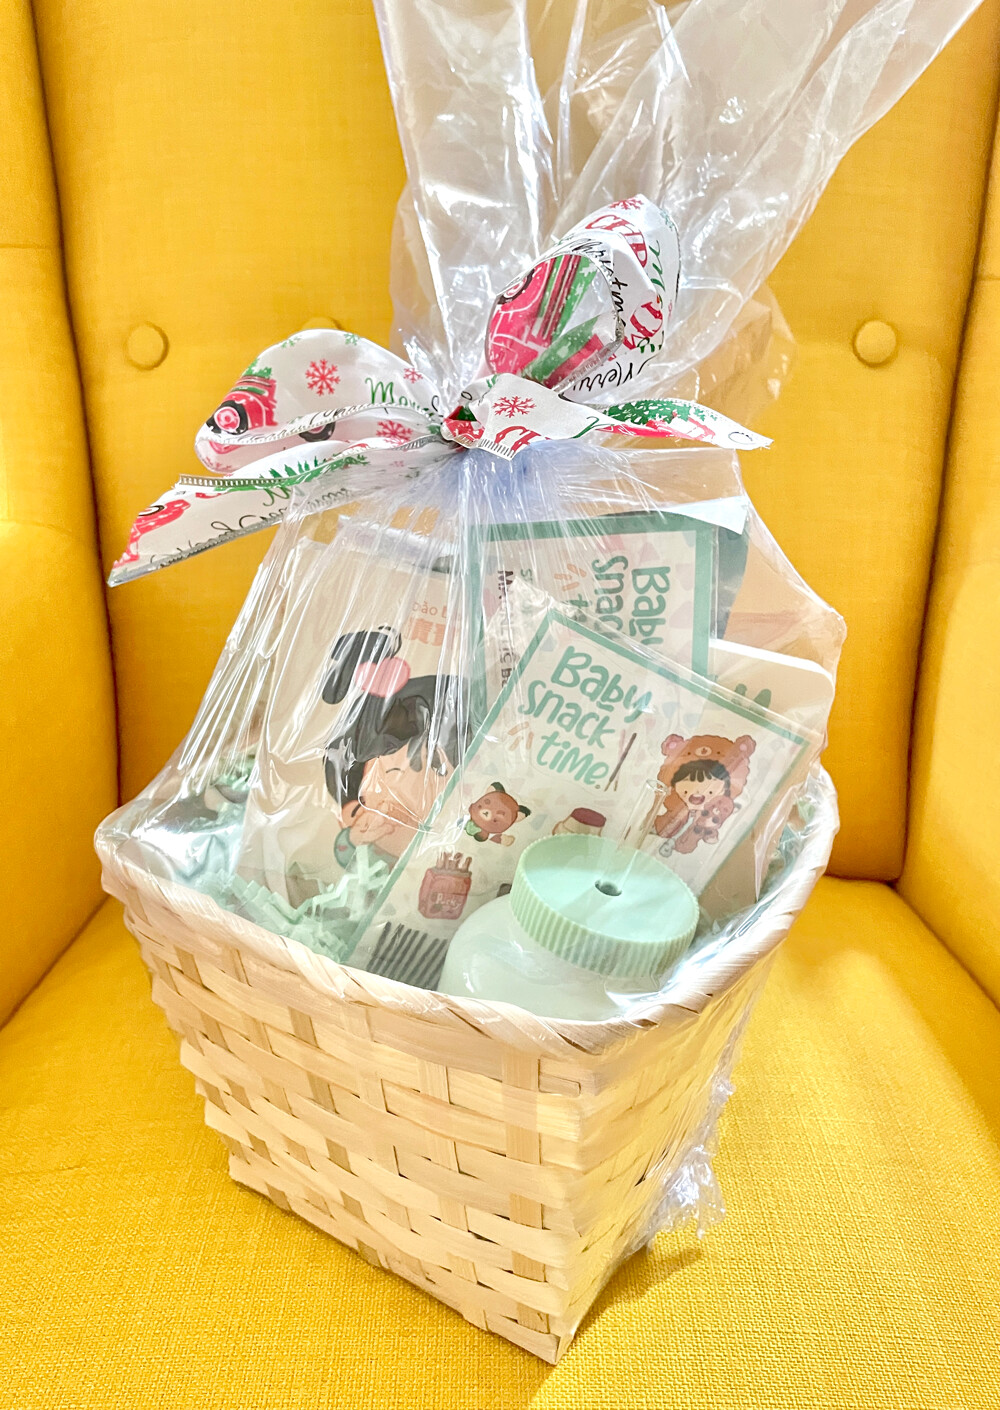 Baby Snack Time Merch Gift Basket